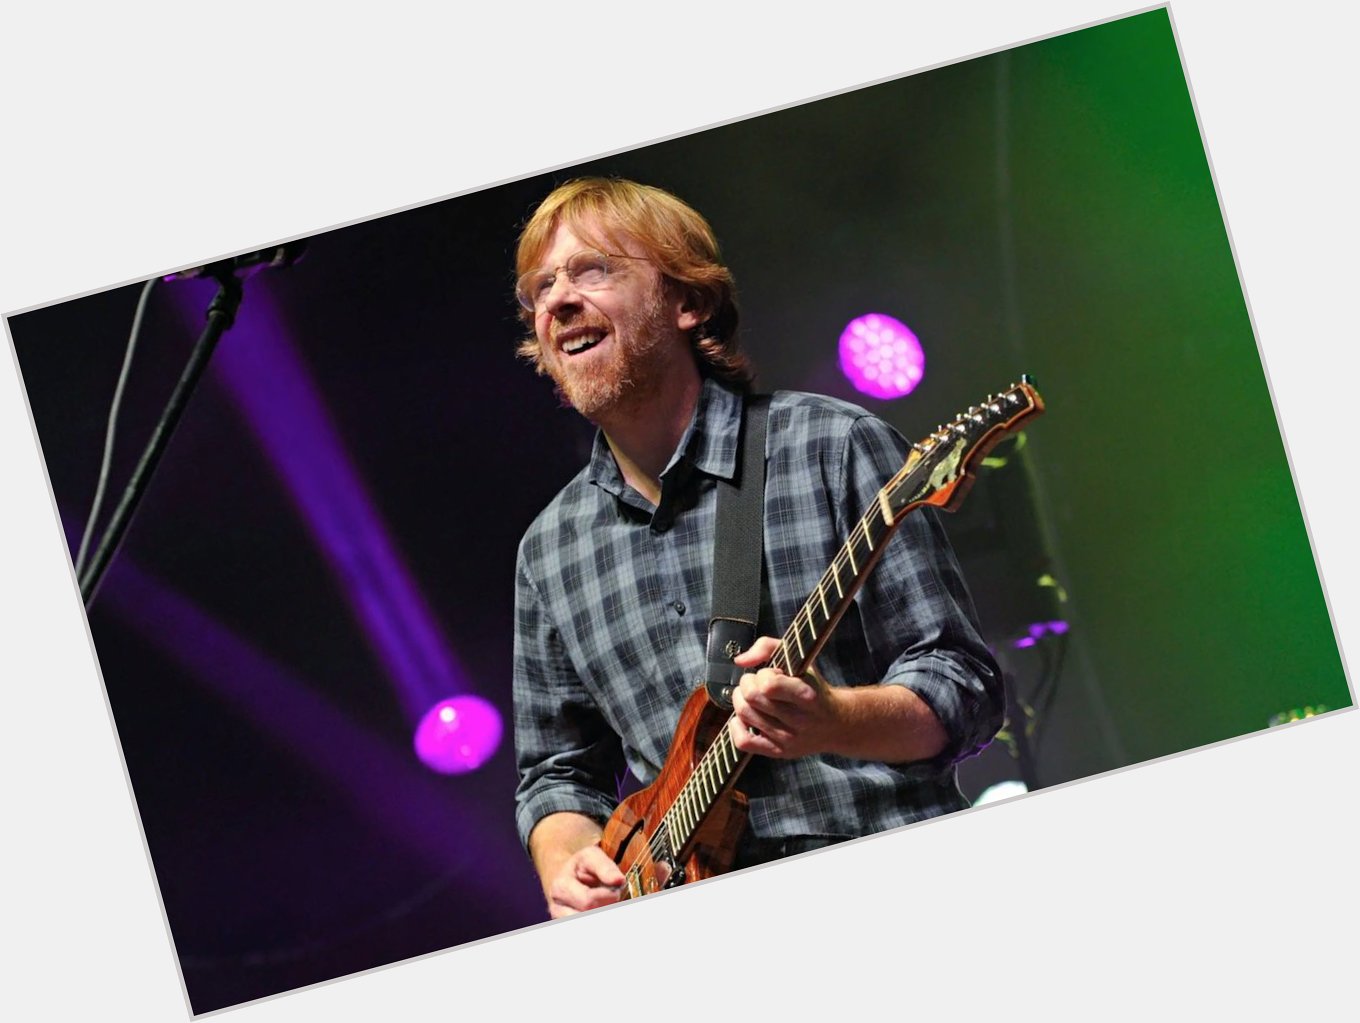 Happy Birthday to Trey Anastasio, founder and leader of Phish, born in the rock, 9/30/1964.  